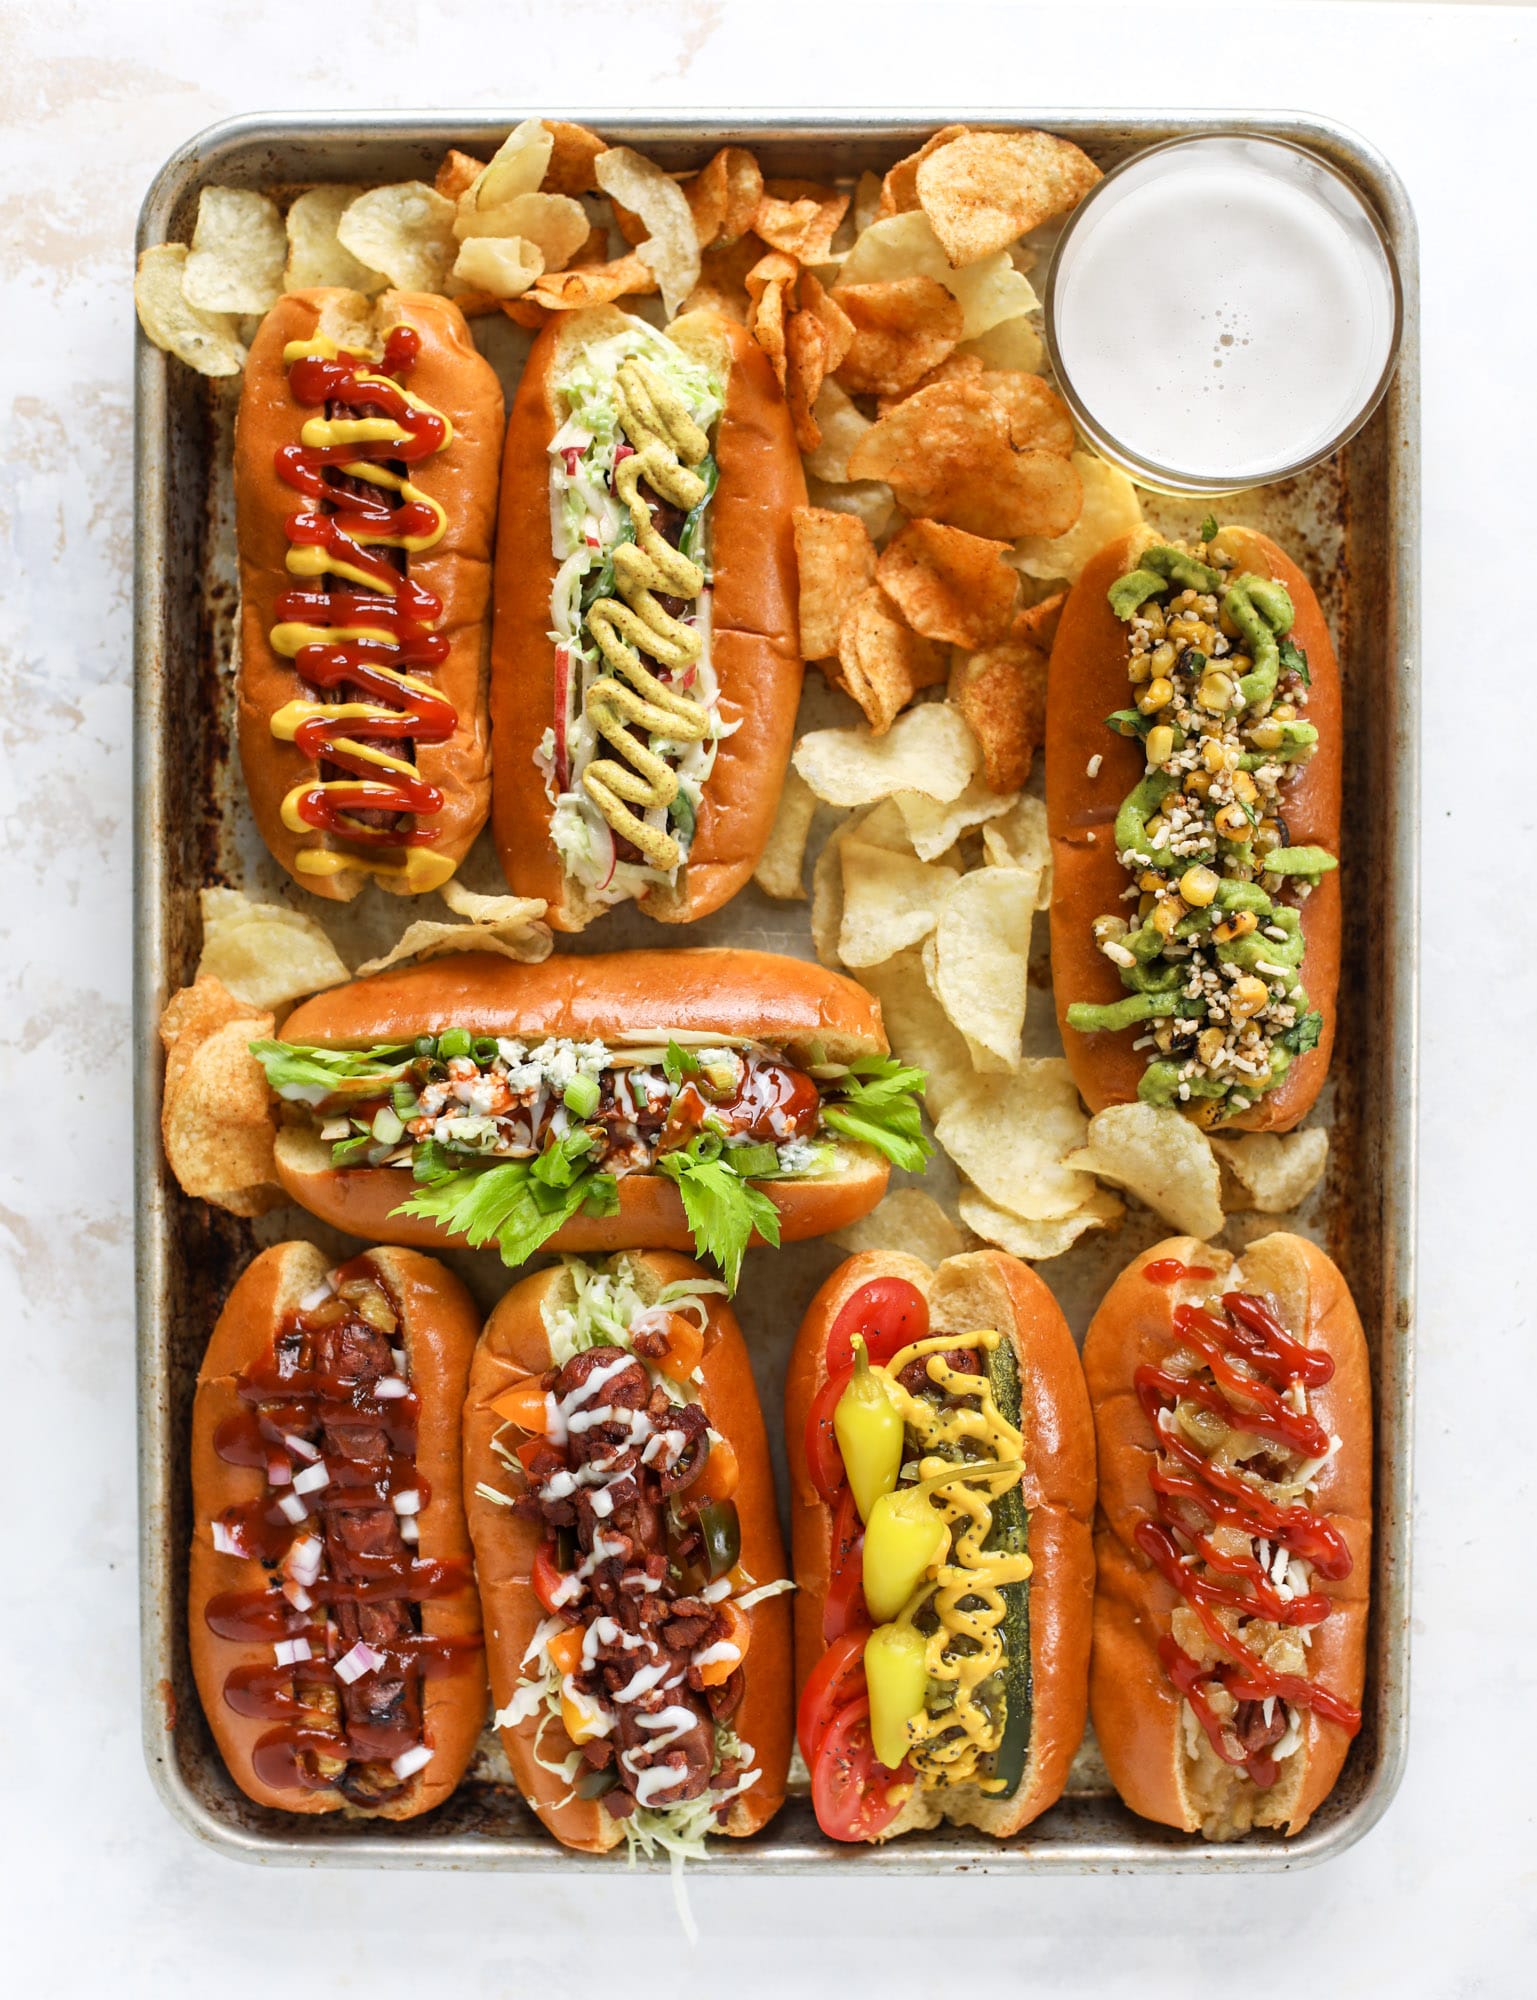 Nothing screams summer more than a hot dog bar! Grab your buns and dogs and a whole lot of toppings. This is super fun and delicious!